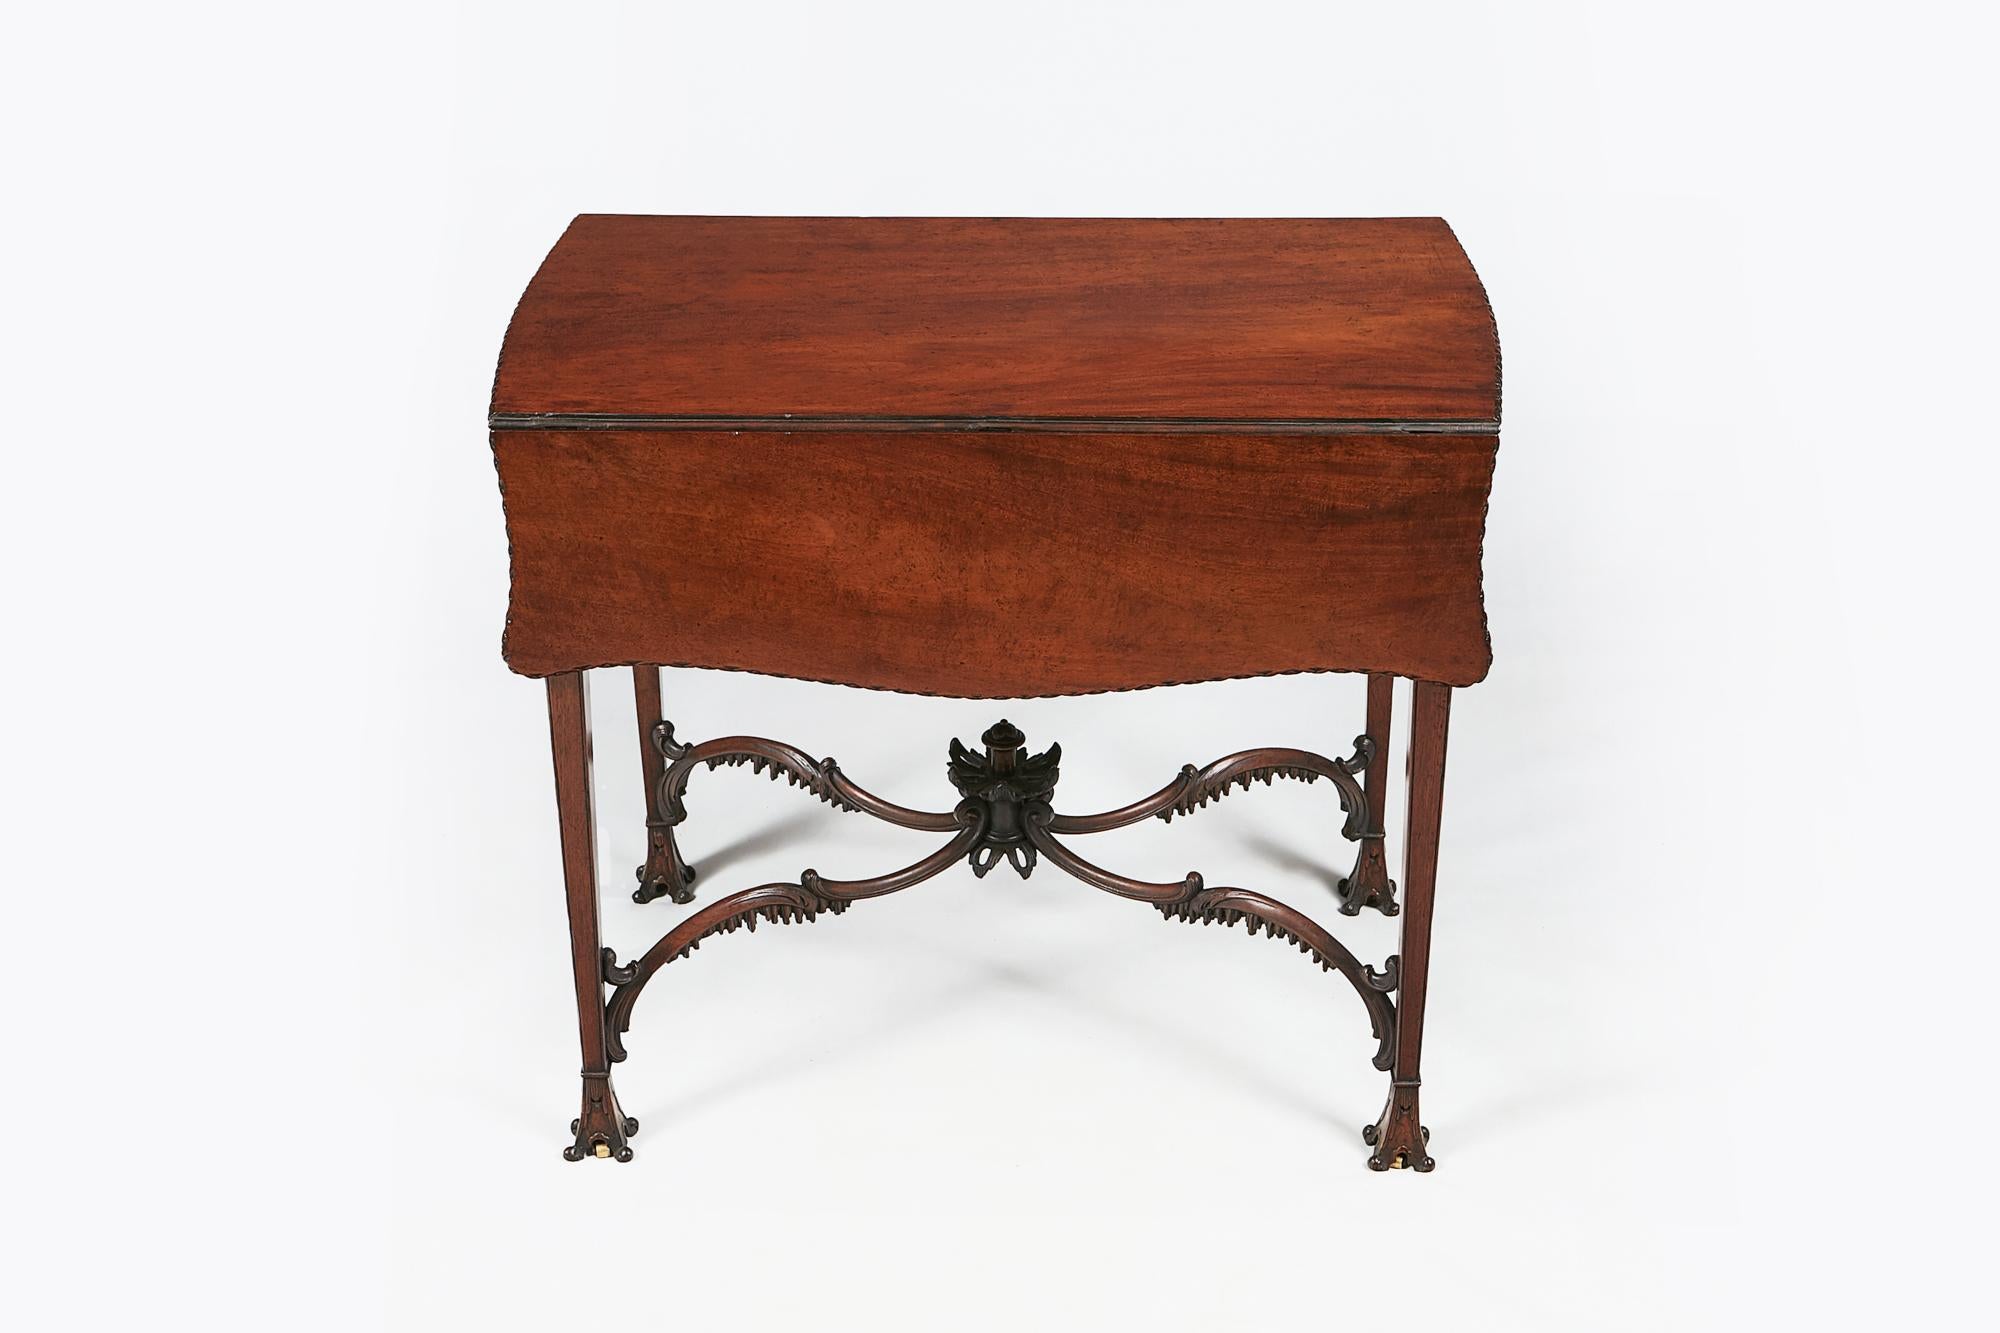 18th century mahogany pembroke table in the style of Chippendale, the shaped butterfly top with fret moulded edges raised over single drawer with brass pulls, carved bellflower and foliate motif over shaped frieze supported on slender tapering leg